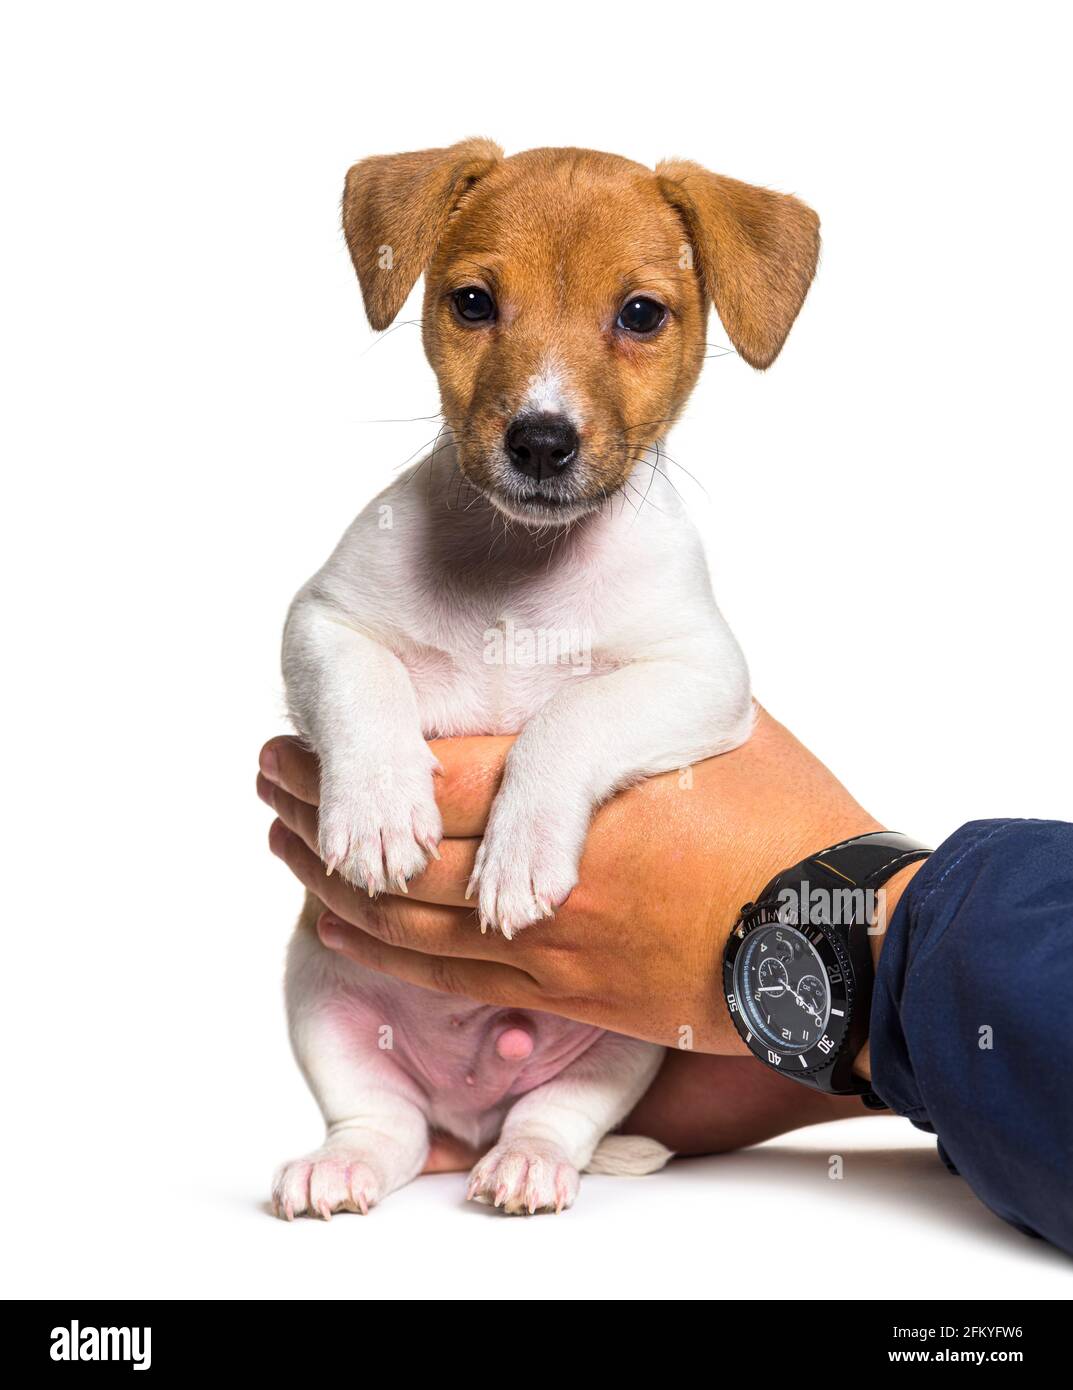 Human Hands holding a Puppy Jack russel terrier dog two months old Stock Photo